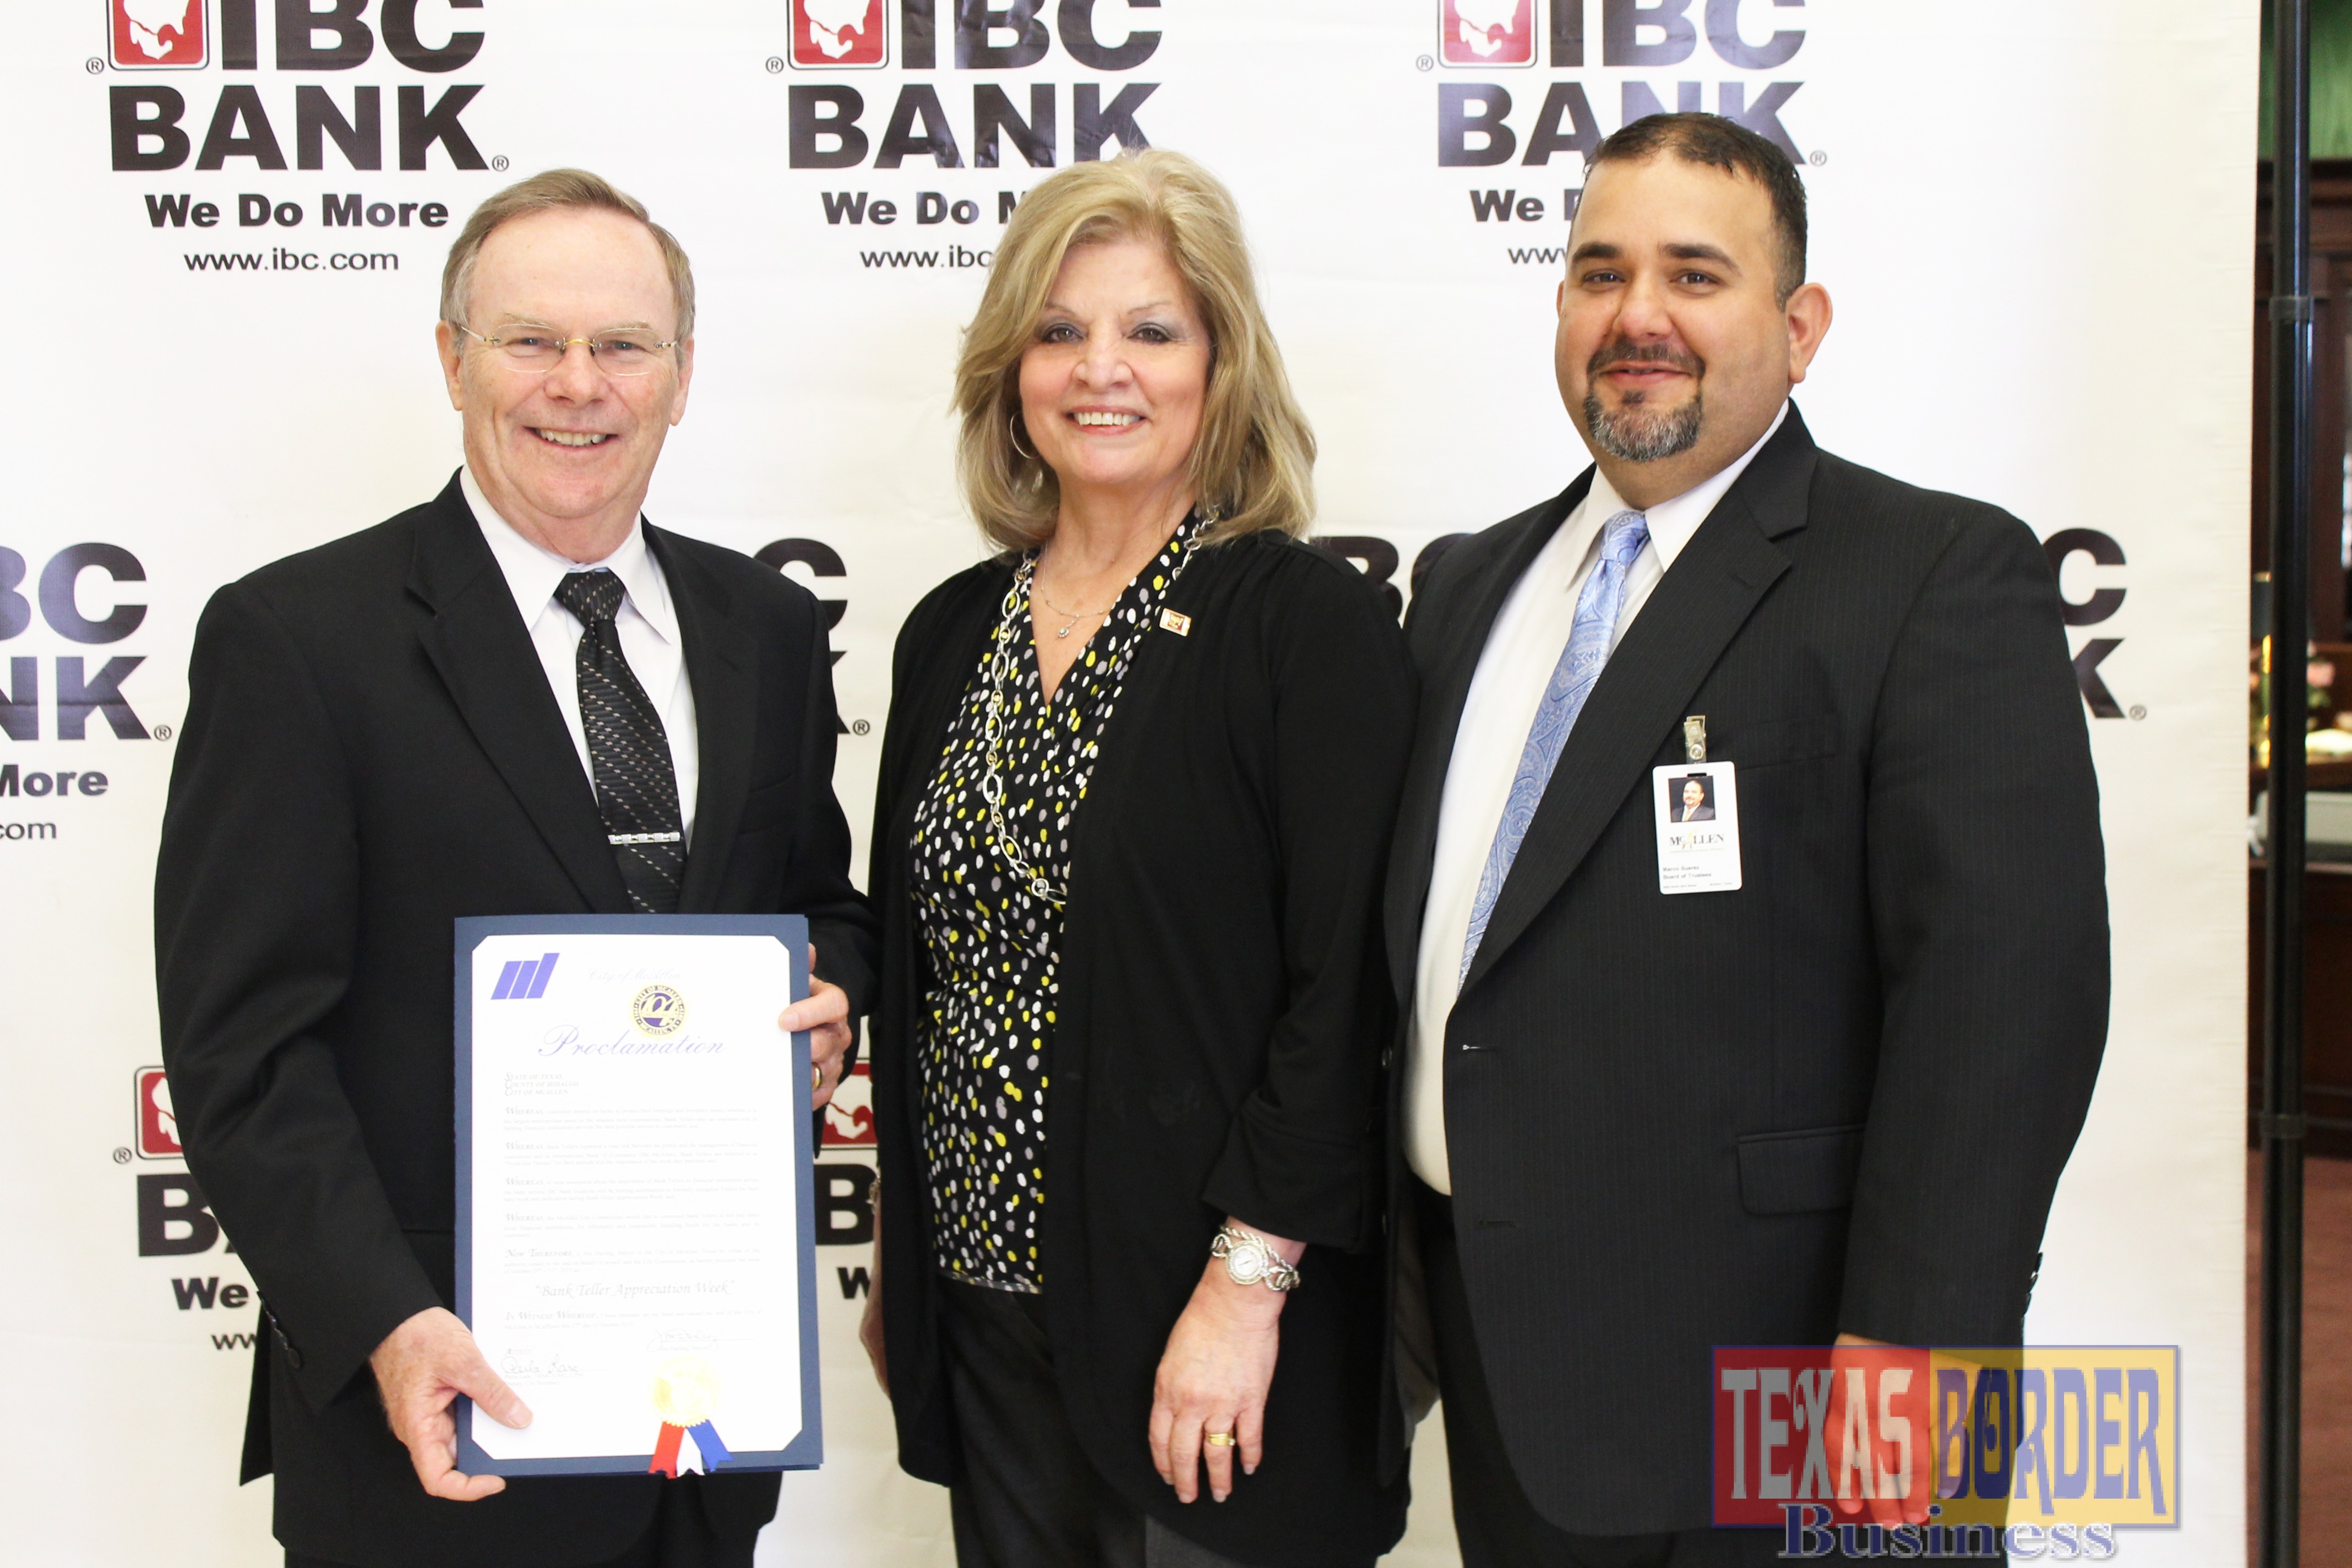 Who better than McAllen Mayor Jim Darling to read a City of McAllen Proclamation to celebrate Teller's Day at IBC Bank McAllen. Pictured above from L-R: Jim Darling, McAllen Mayor; Dora Brown, Vice President of Marketing and Marco Suarez McAllen ISD board trustee. )Courtesy photo IBC marketing team)